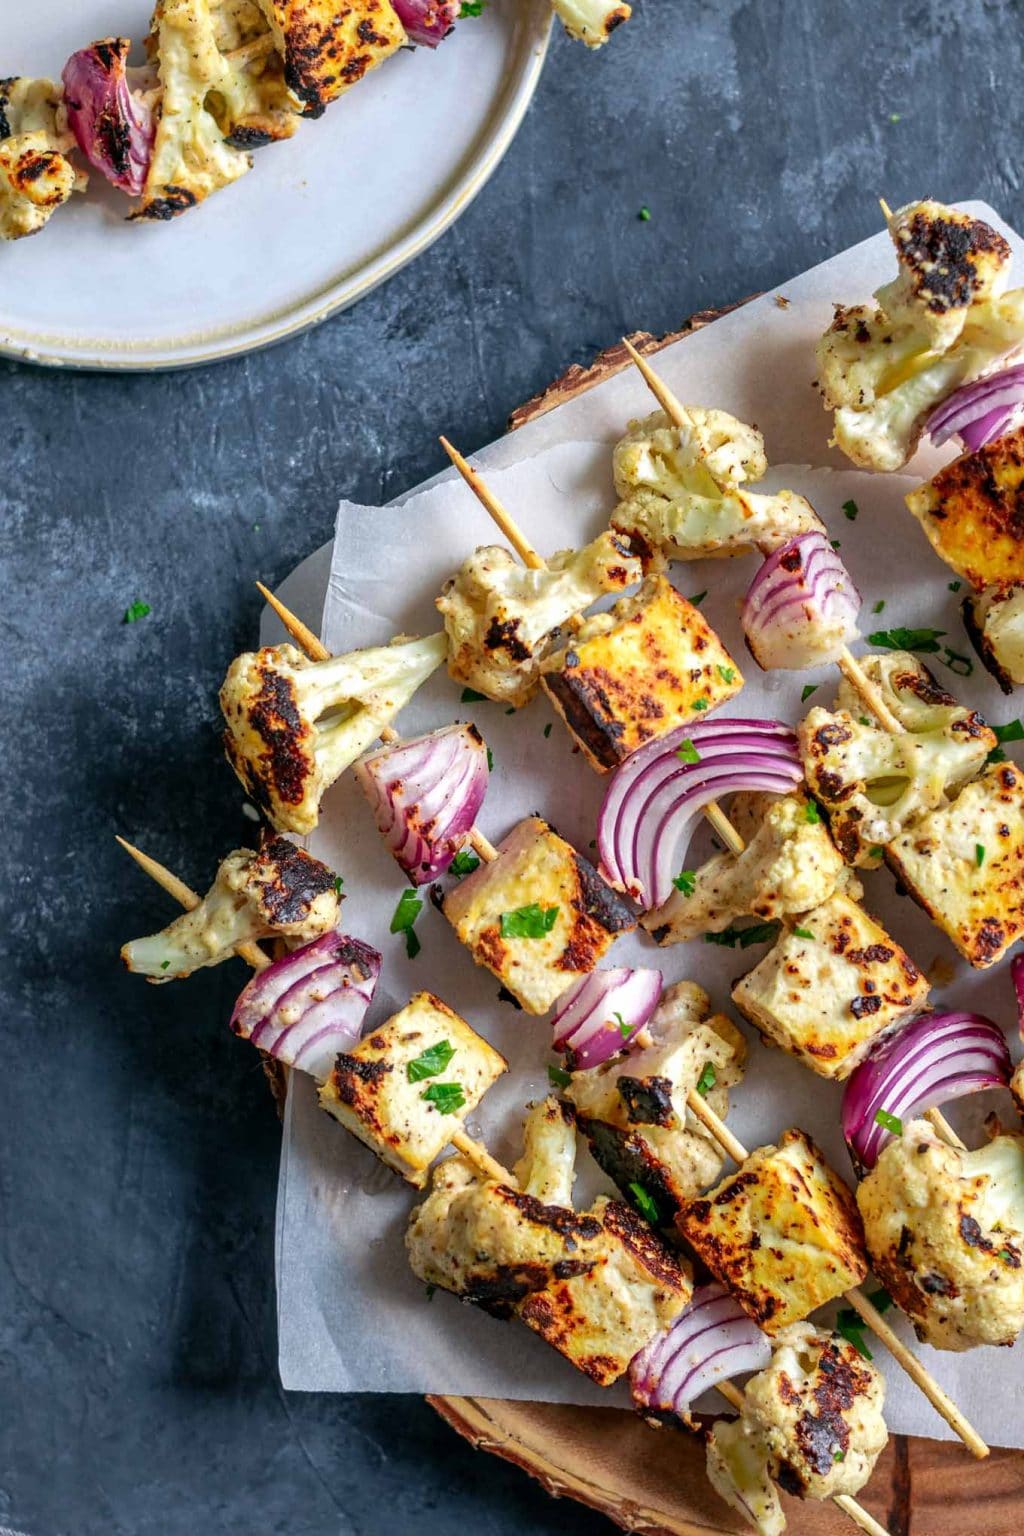 Afghan cauliflower and tofu tikka kebab skewers on a wooden platter with one served on a plate